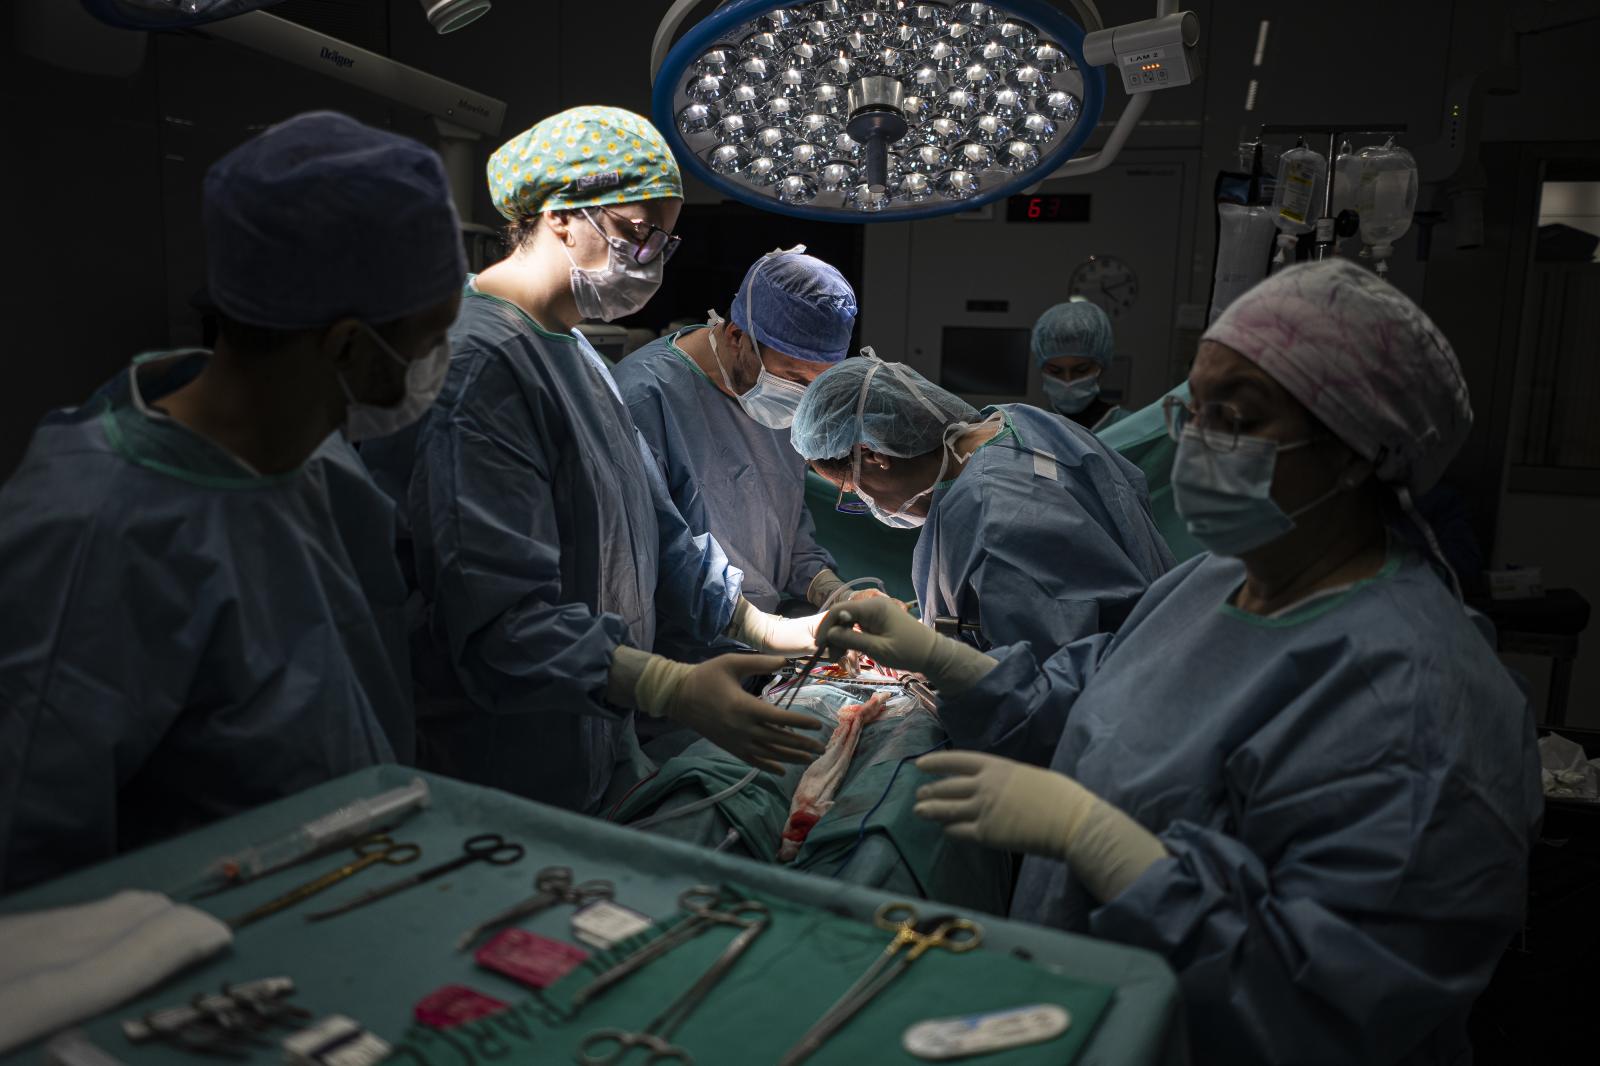 Image from DAILY NEWS - Healthcare professionals work on the double organ...